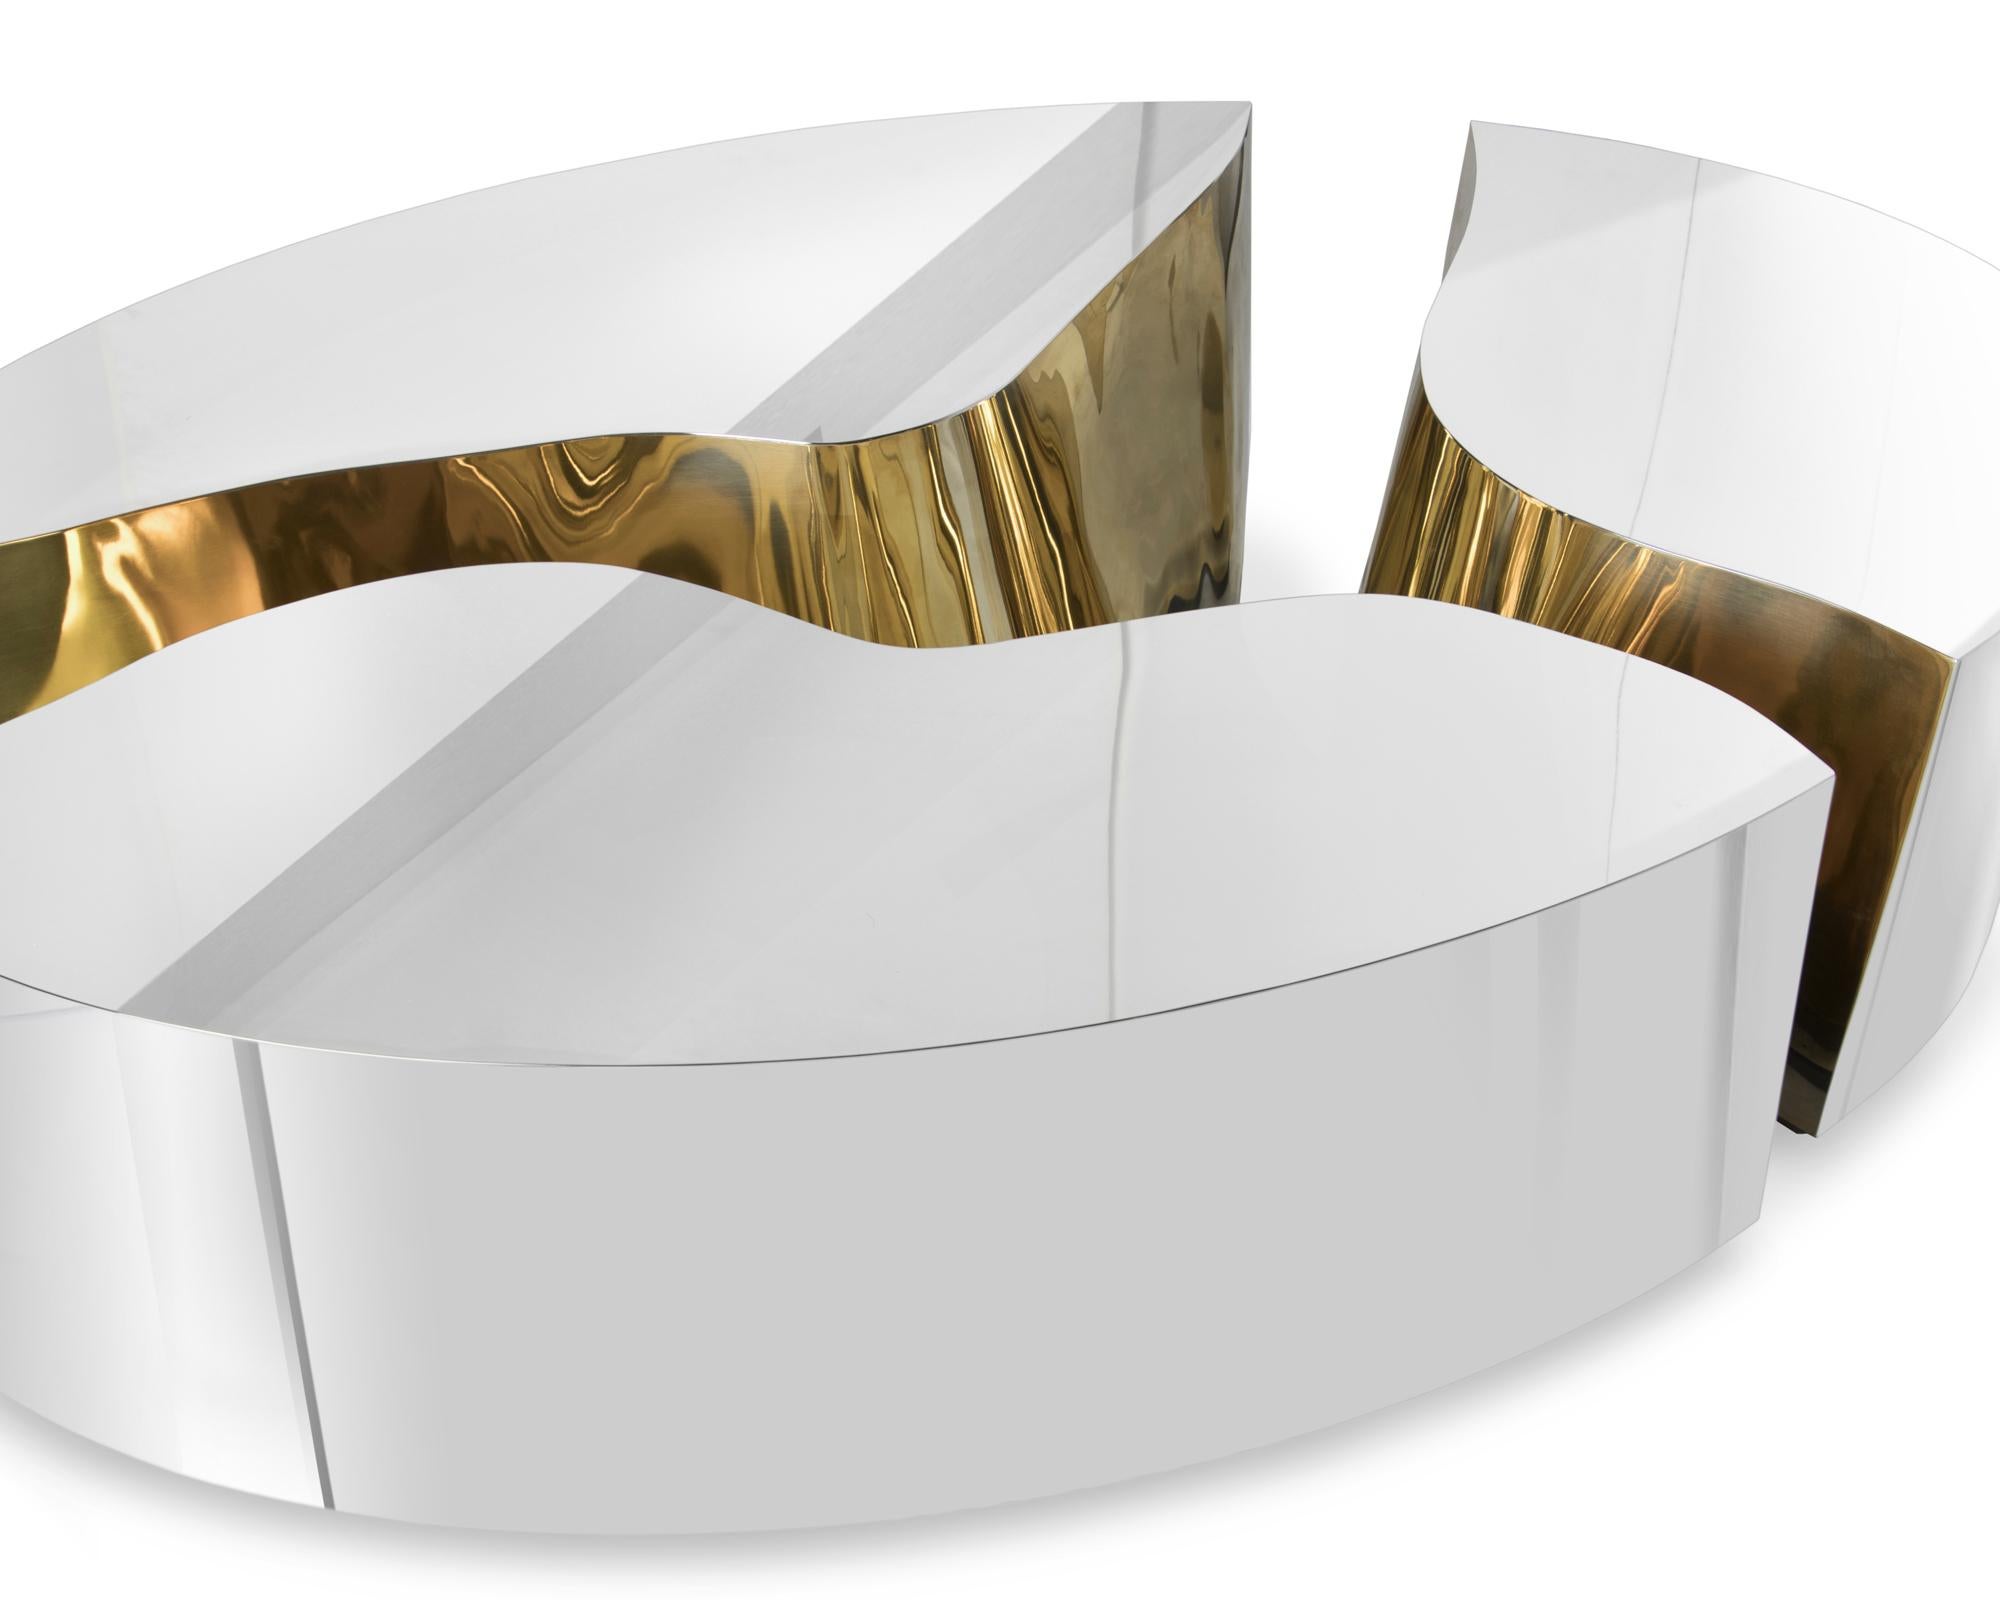 Coffee table paradise oval in polished stainless 
steel and with polished brass inside. On wood 
structure. Also available in poplar root and brass
and available in custom size and custom finishes.